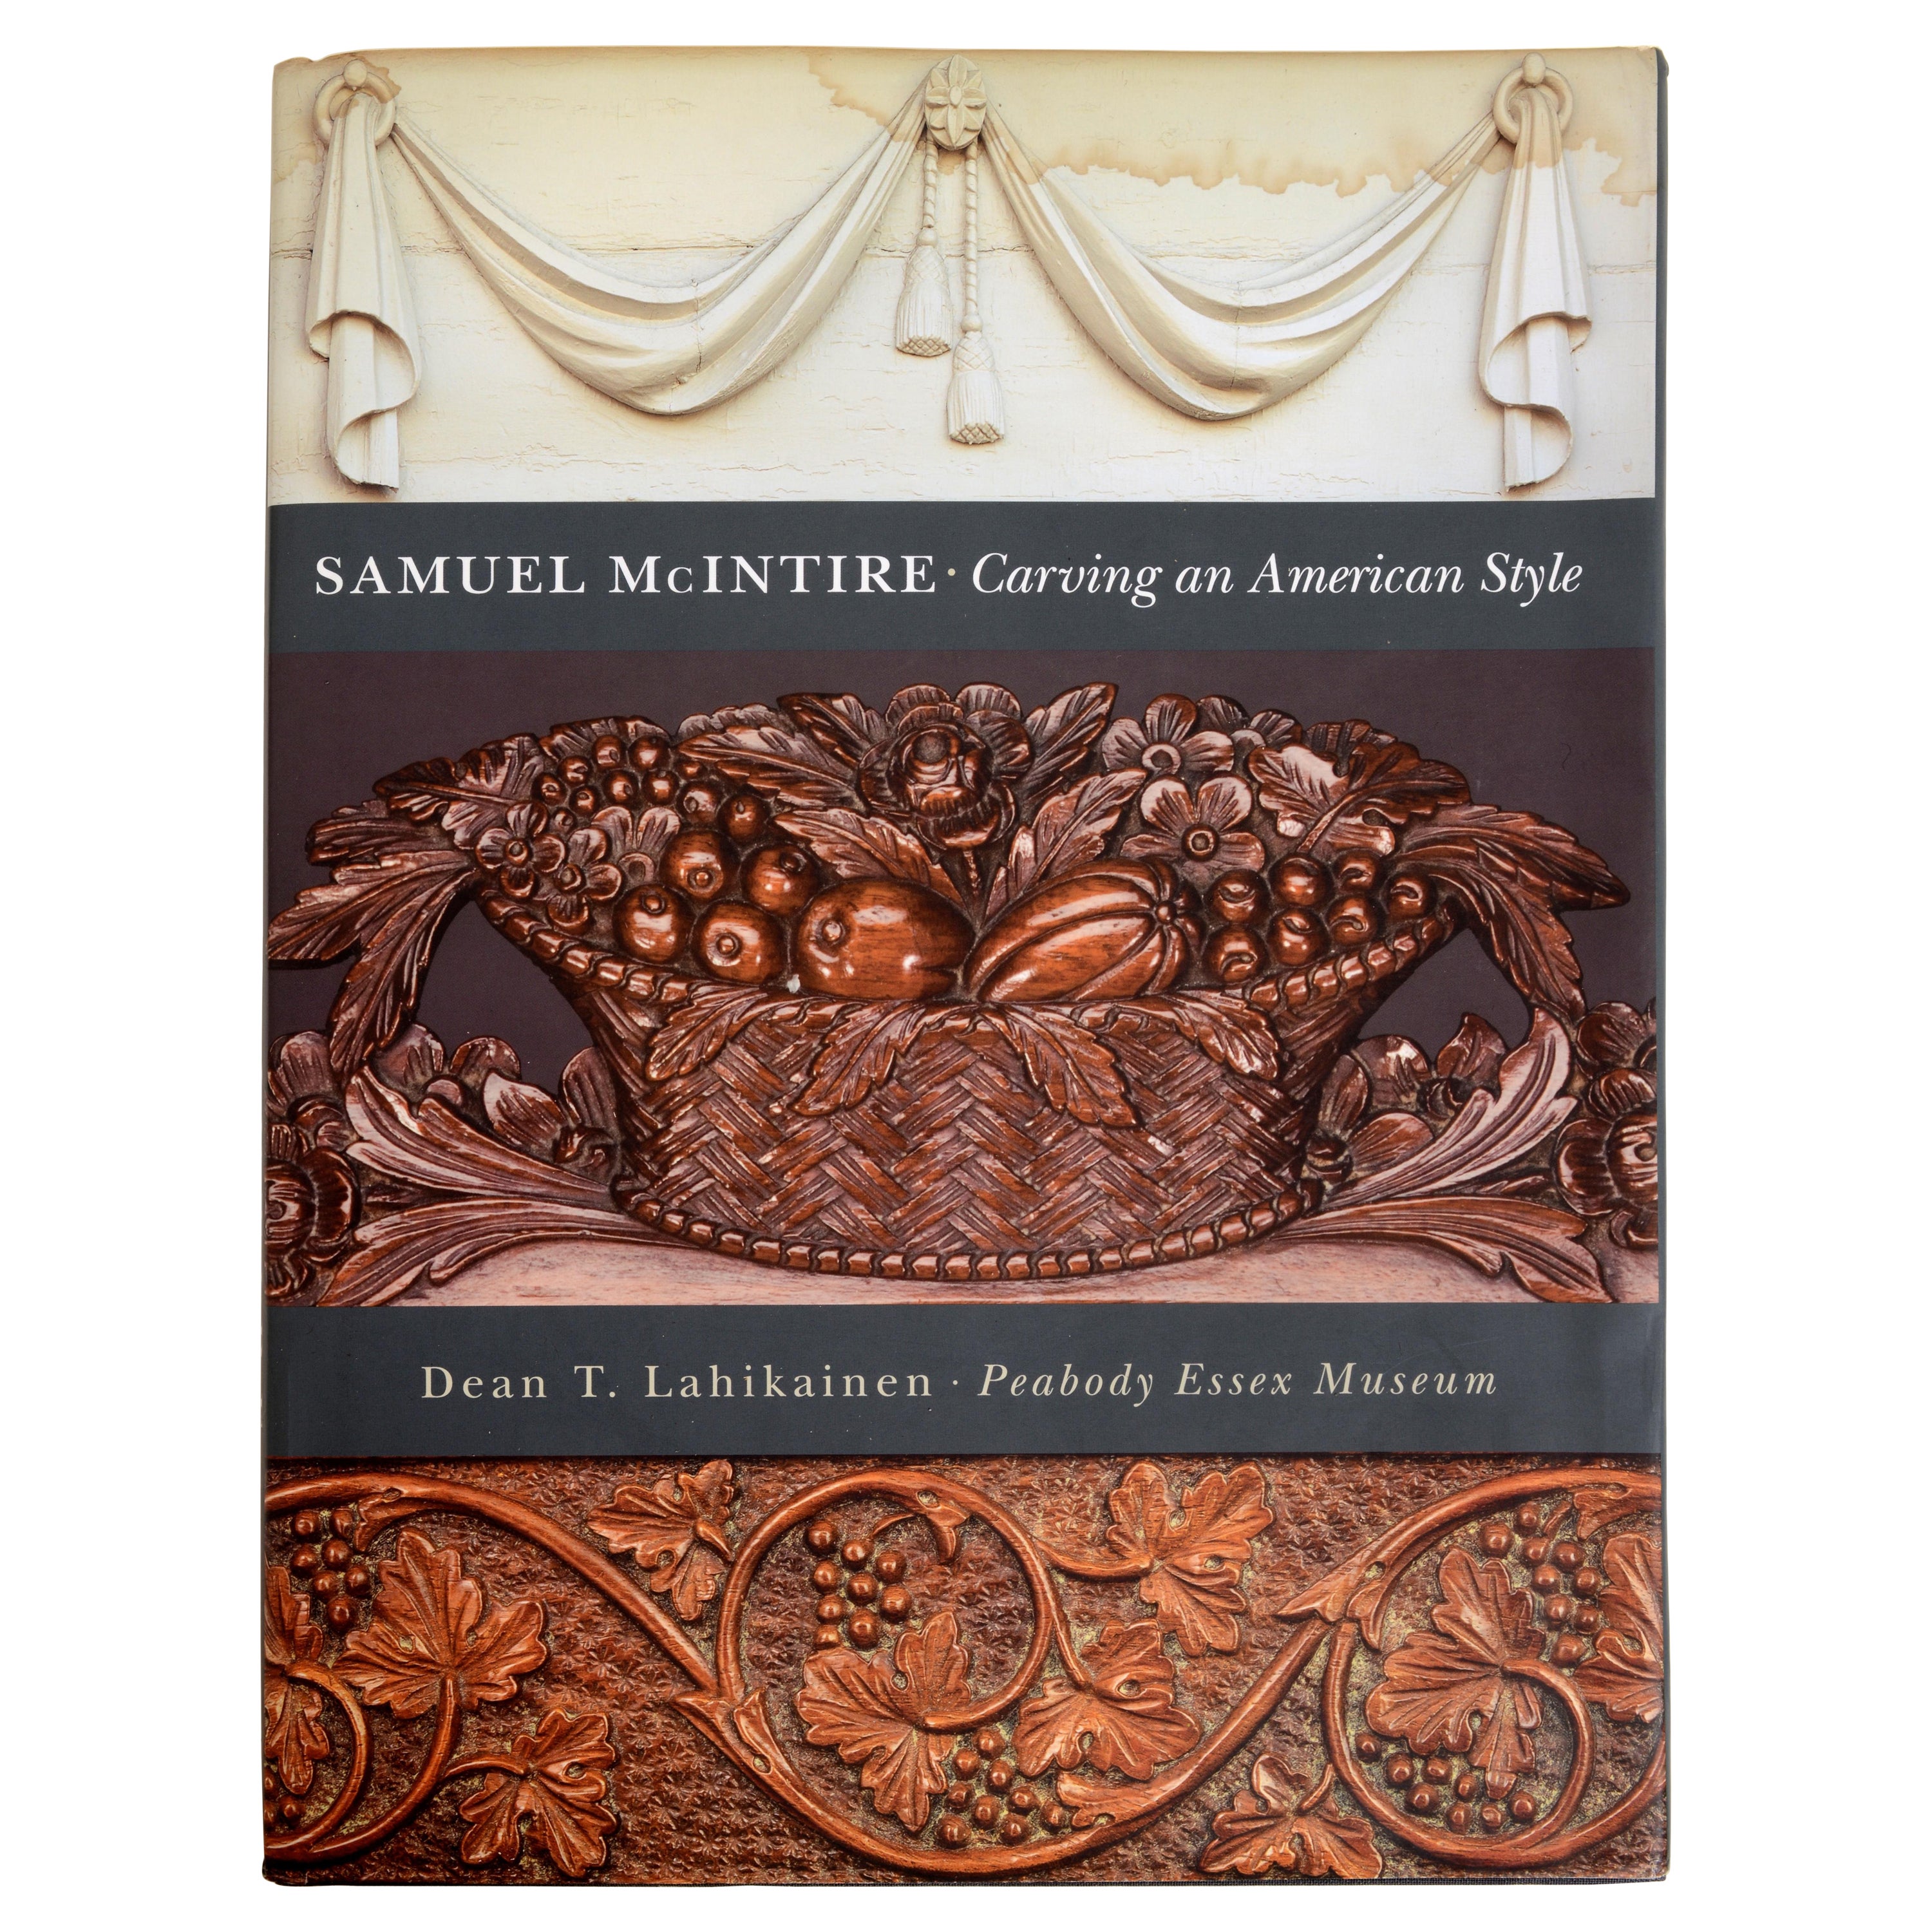 Samuel McIntire: Carving an American Style by Dean T. Lahikainen, 1st Ed